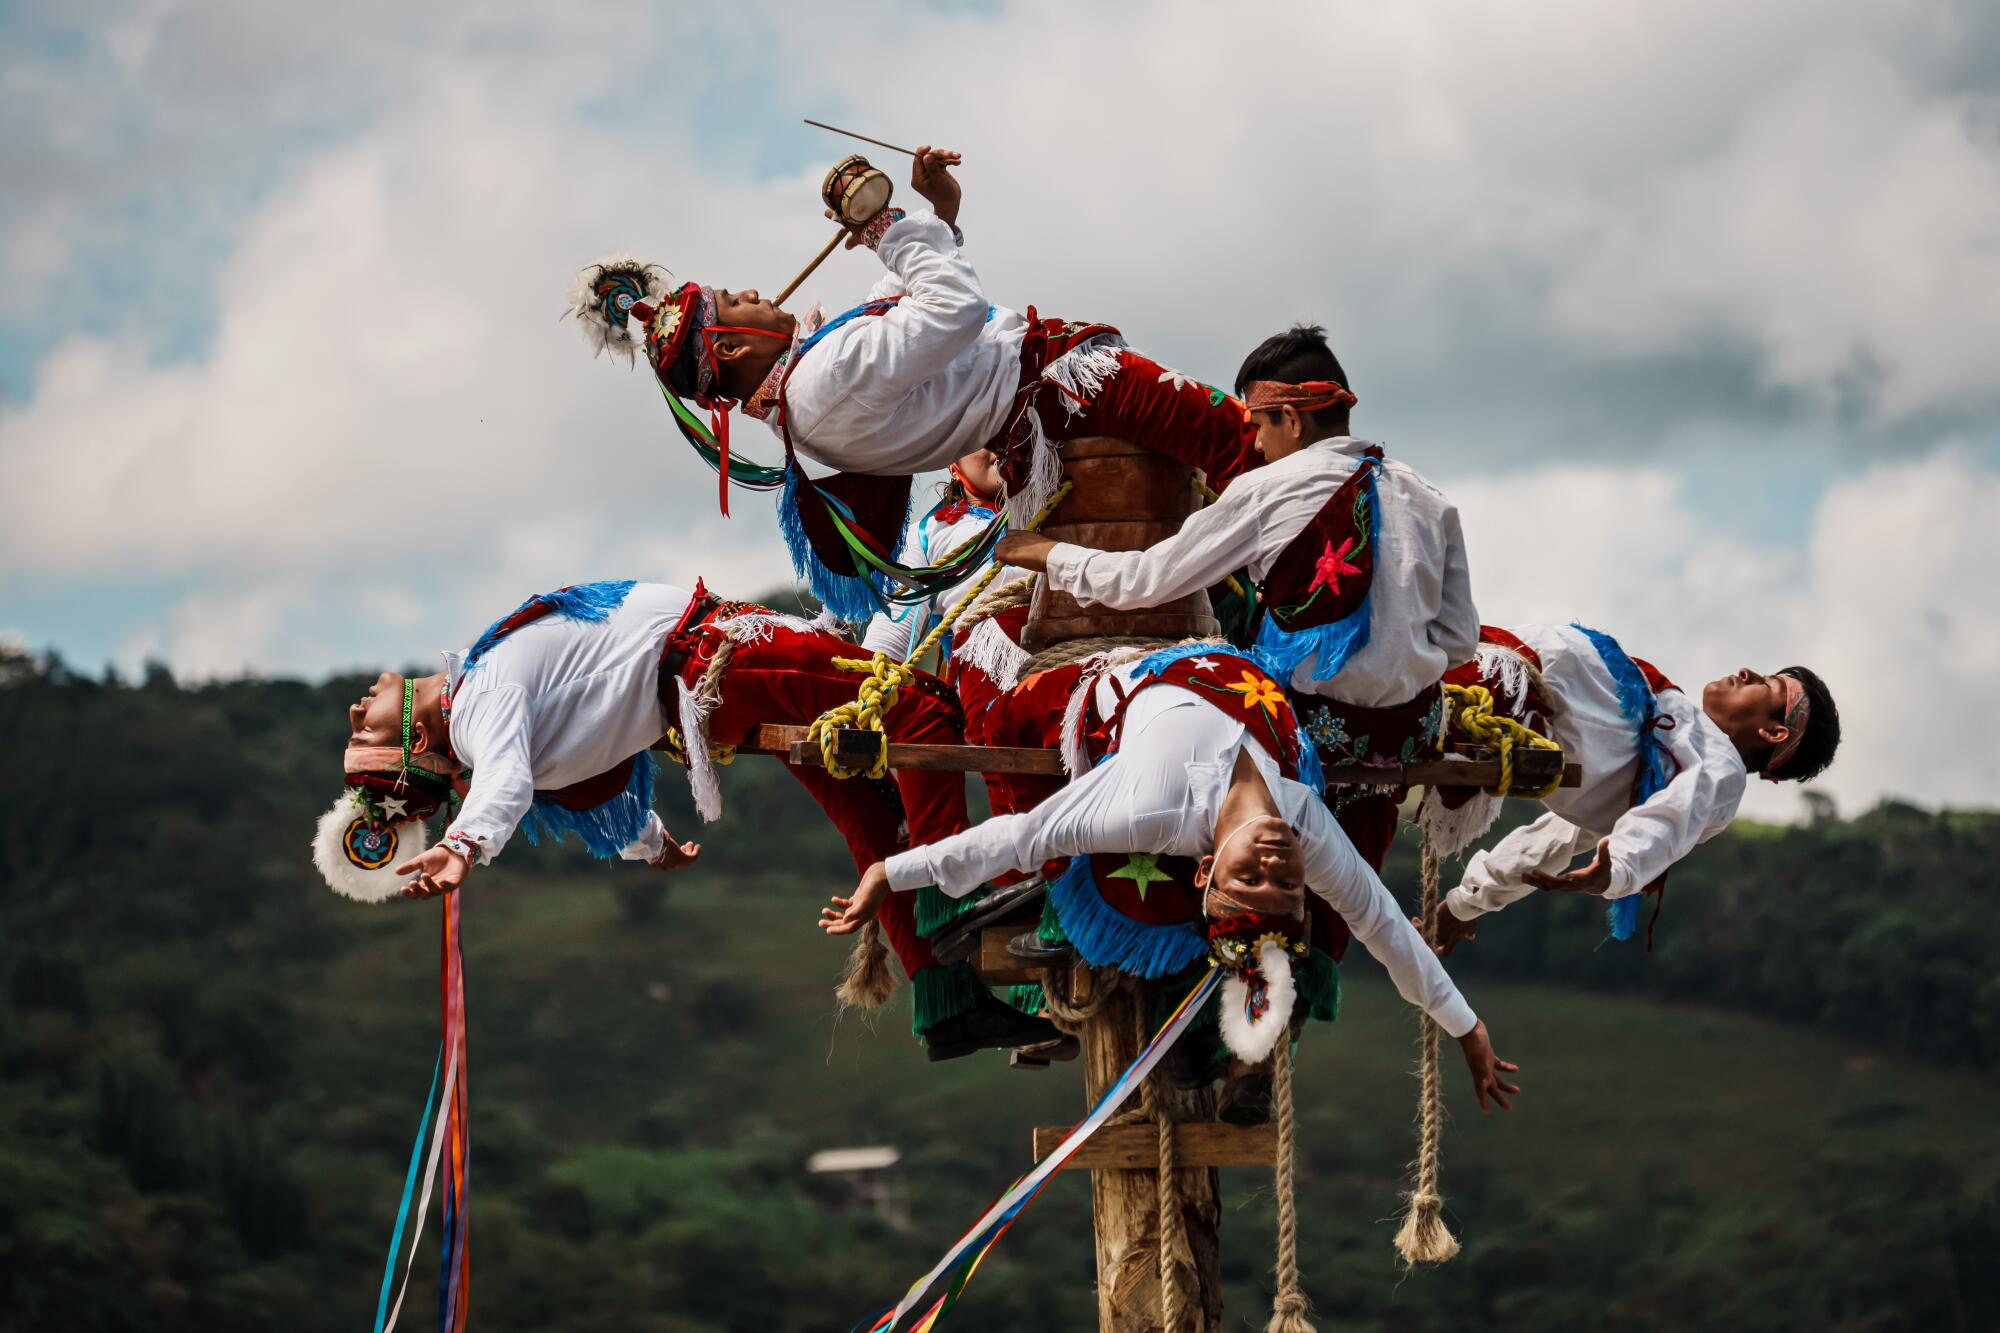 A 100-foot drop, a death-defying ritual: Mexican children learn